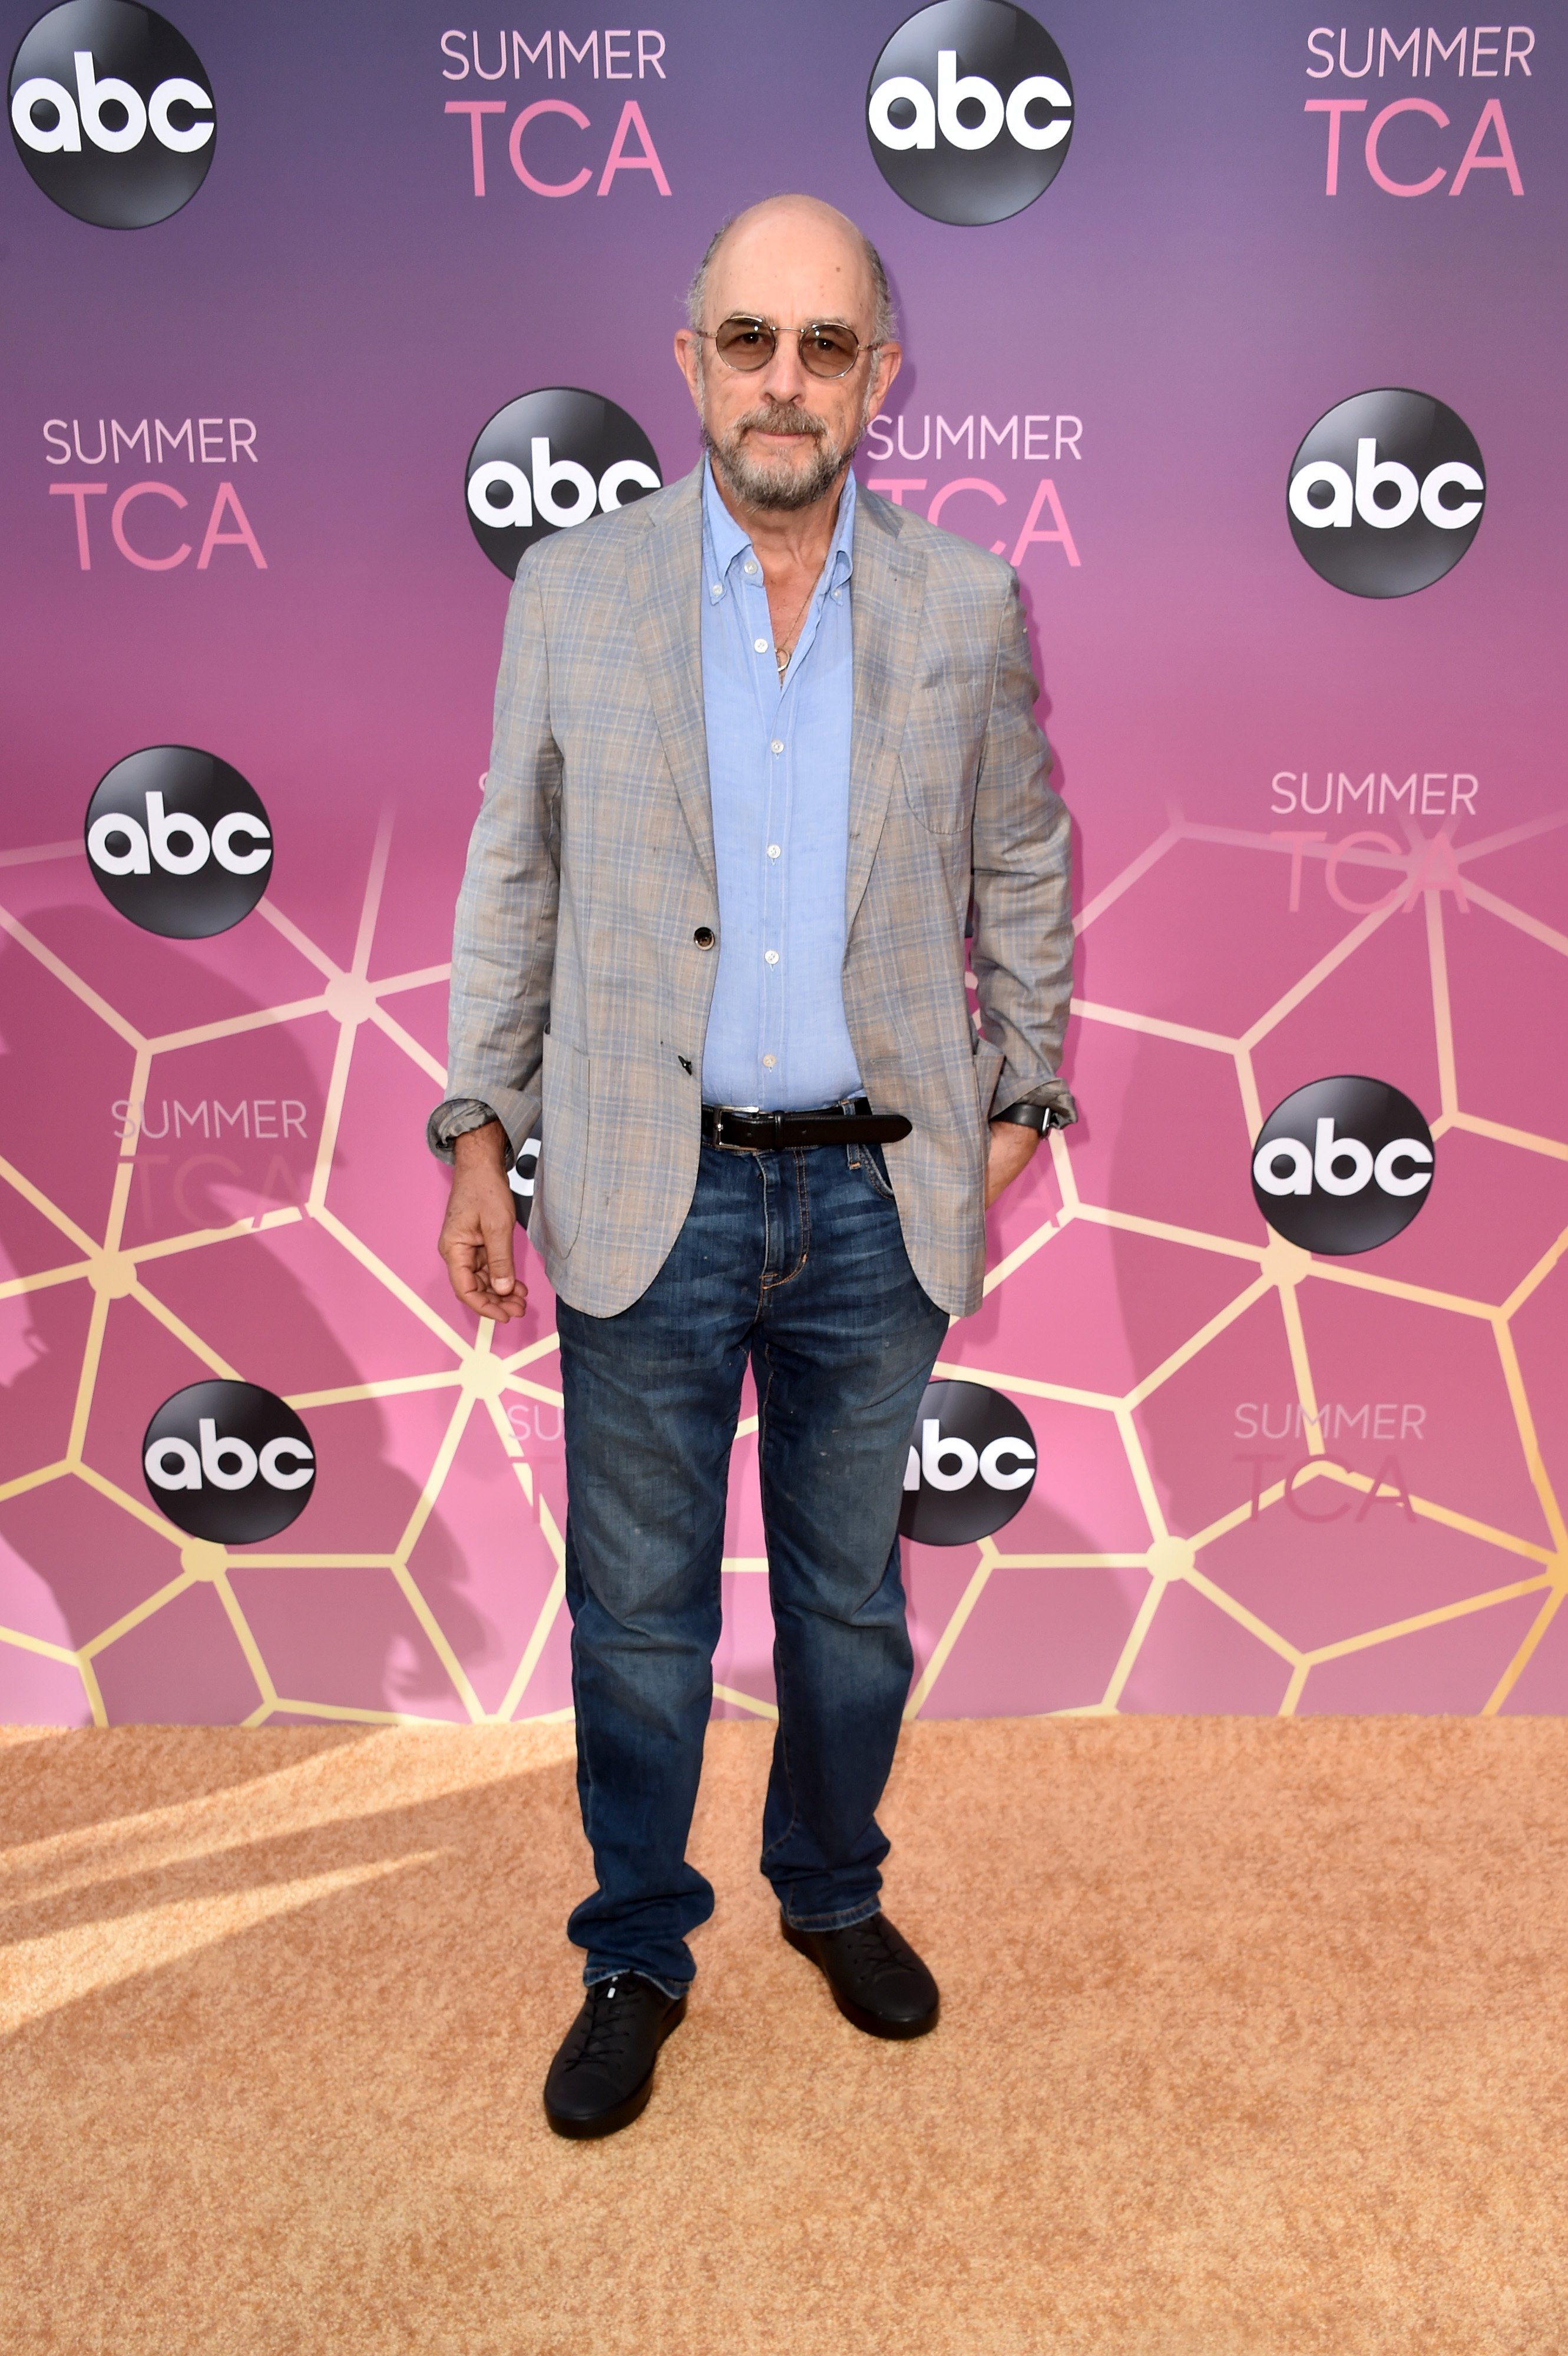 Richard Schiff attends the TCA Summer Press Tour Carpet Event in West Hollywood, California on August 5, 2019 | Photo: Getty Images